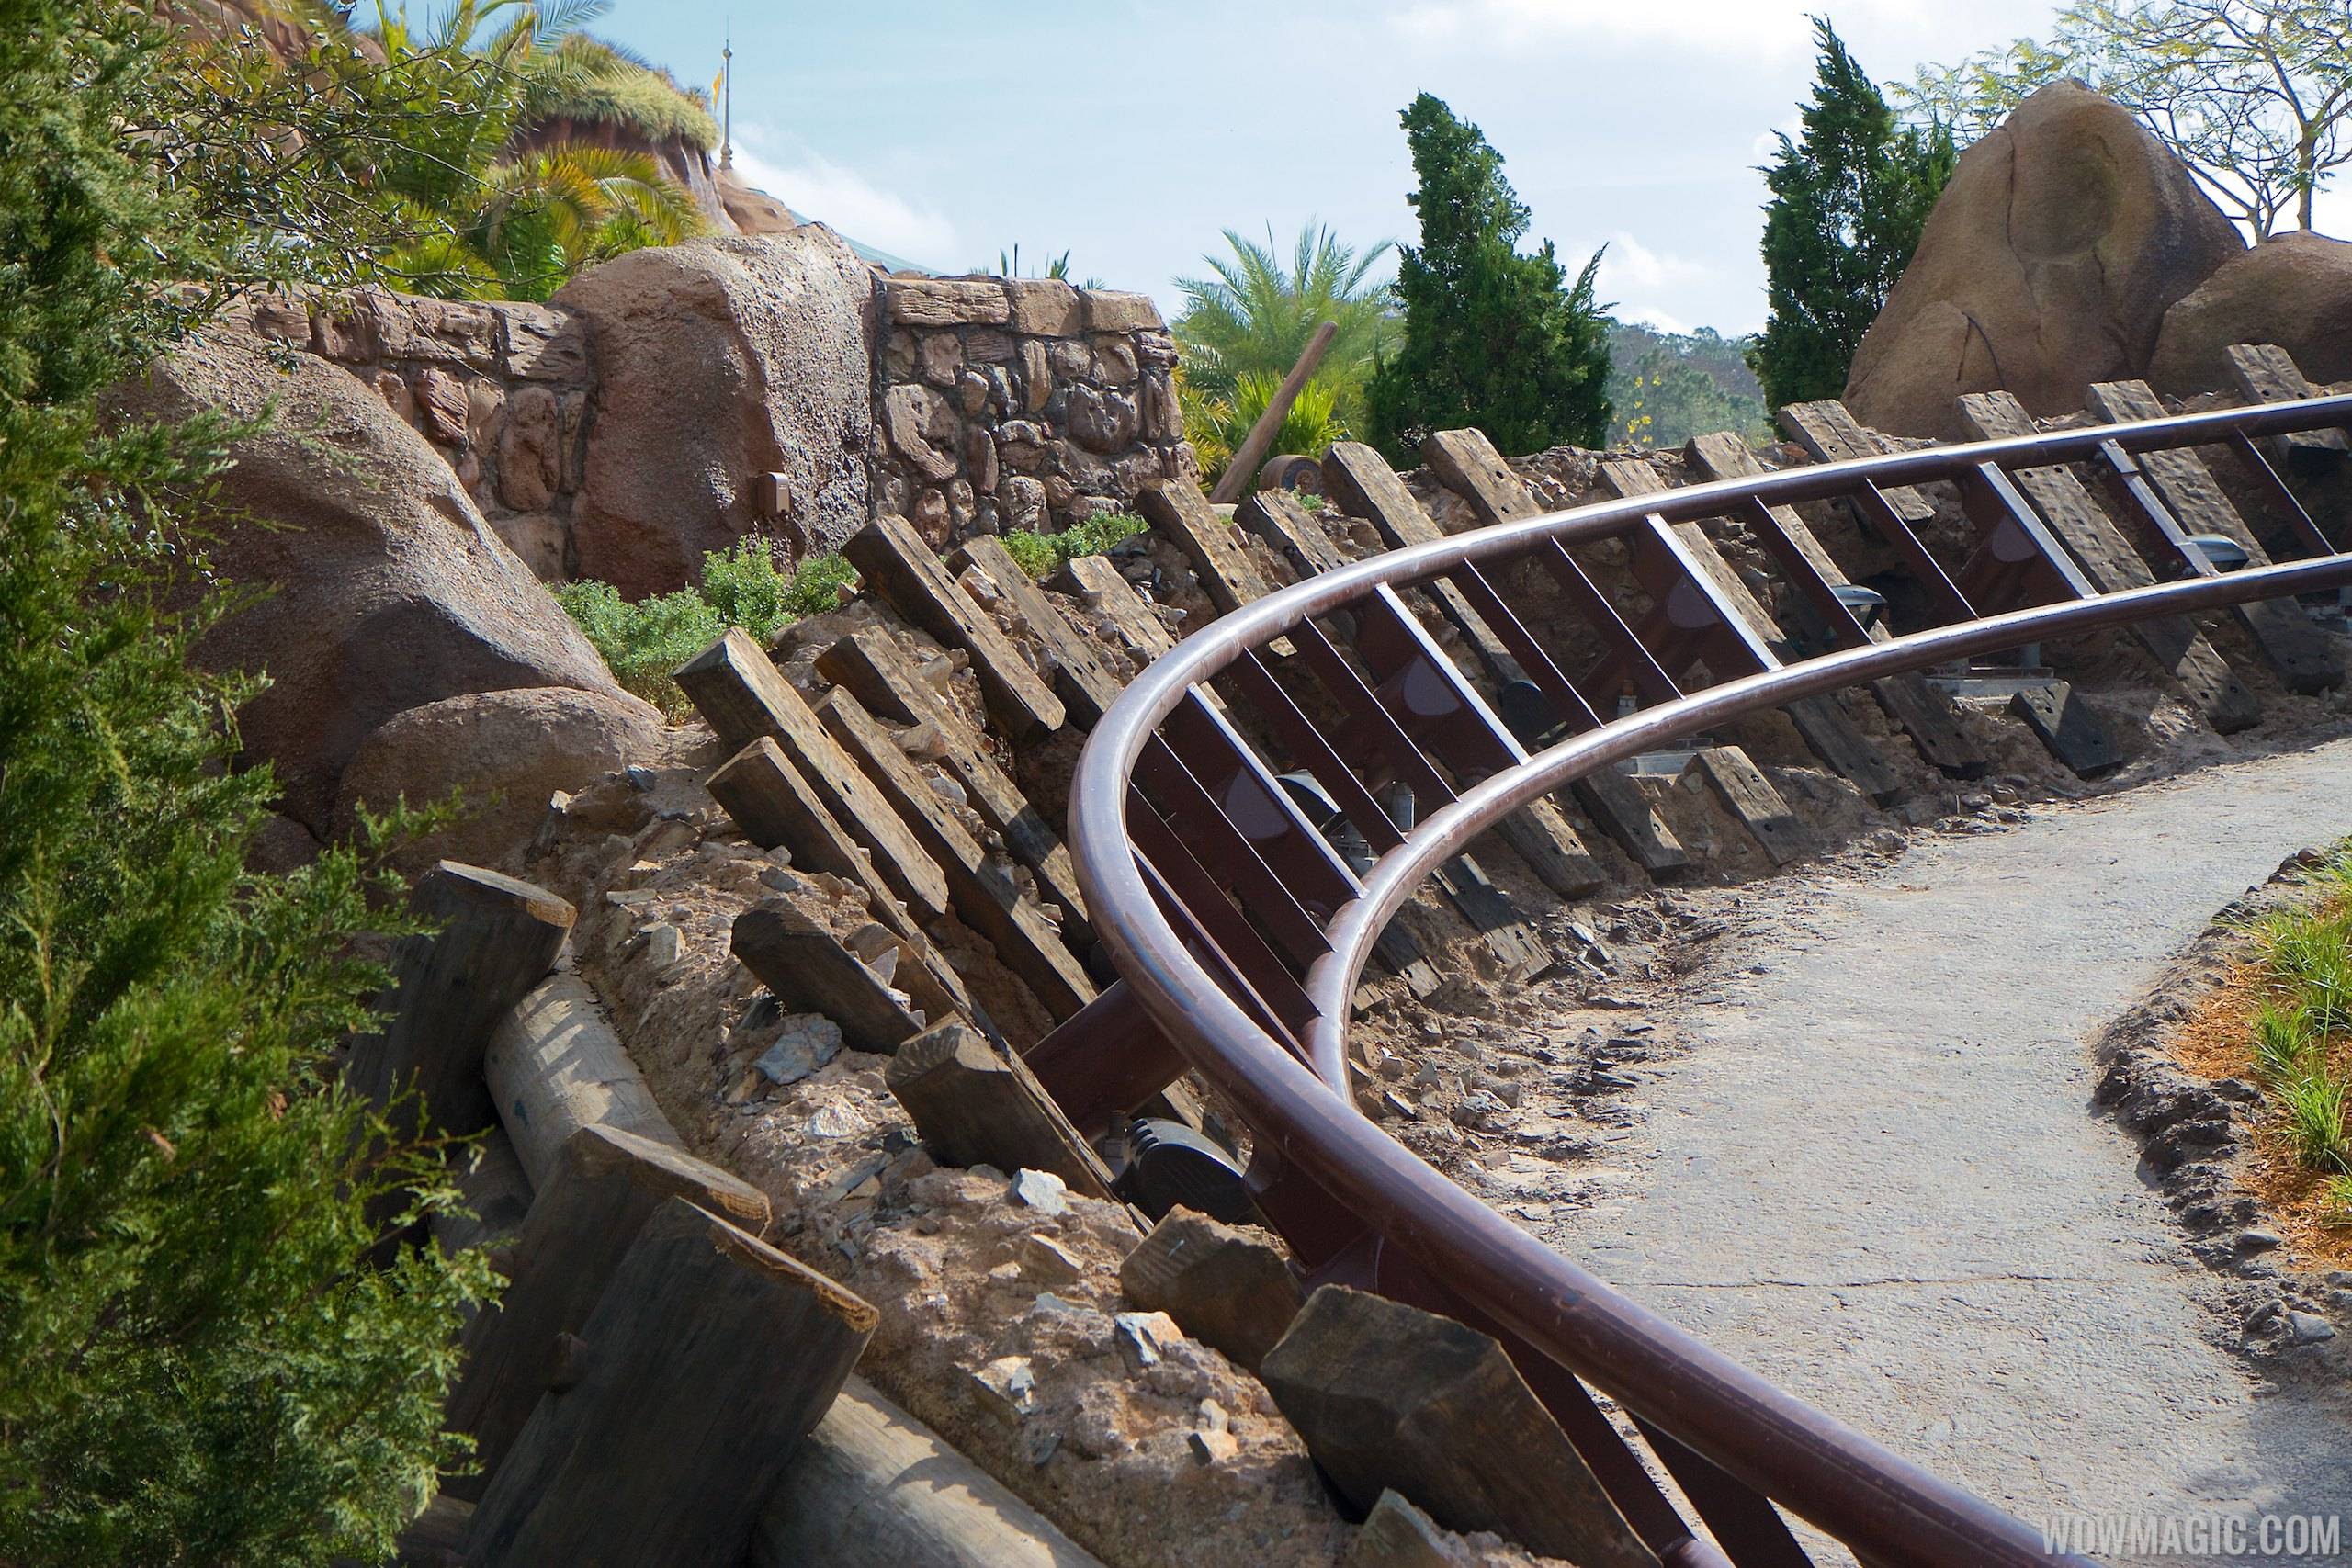 PHOTOS - More walls come down at the Seven Dwarfs Mine Train to reveal waterfalls and the main drop